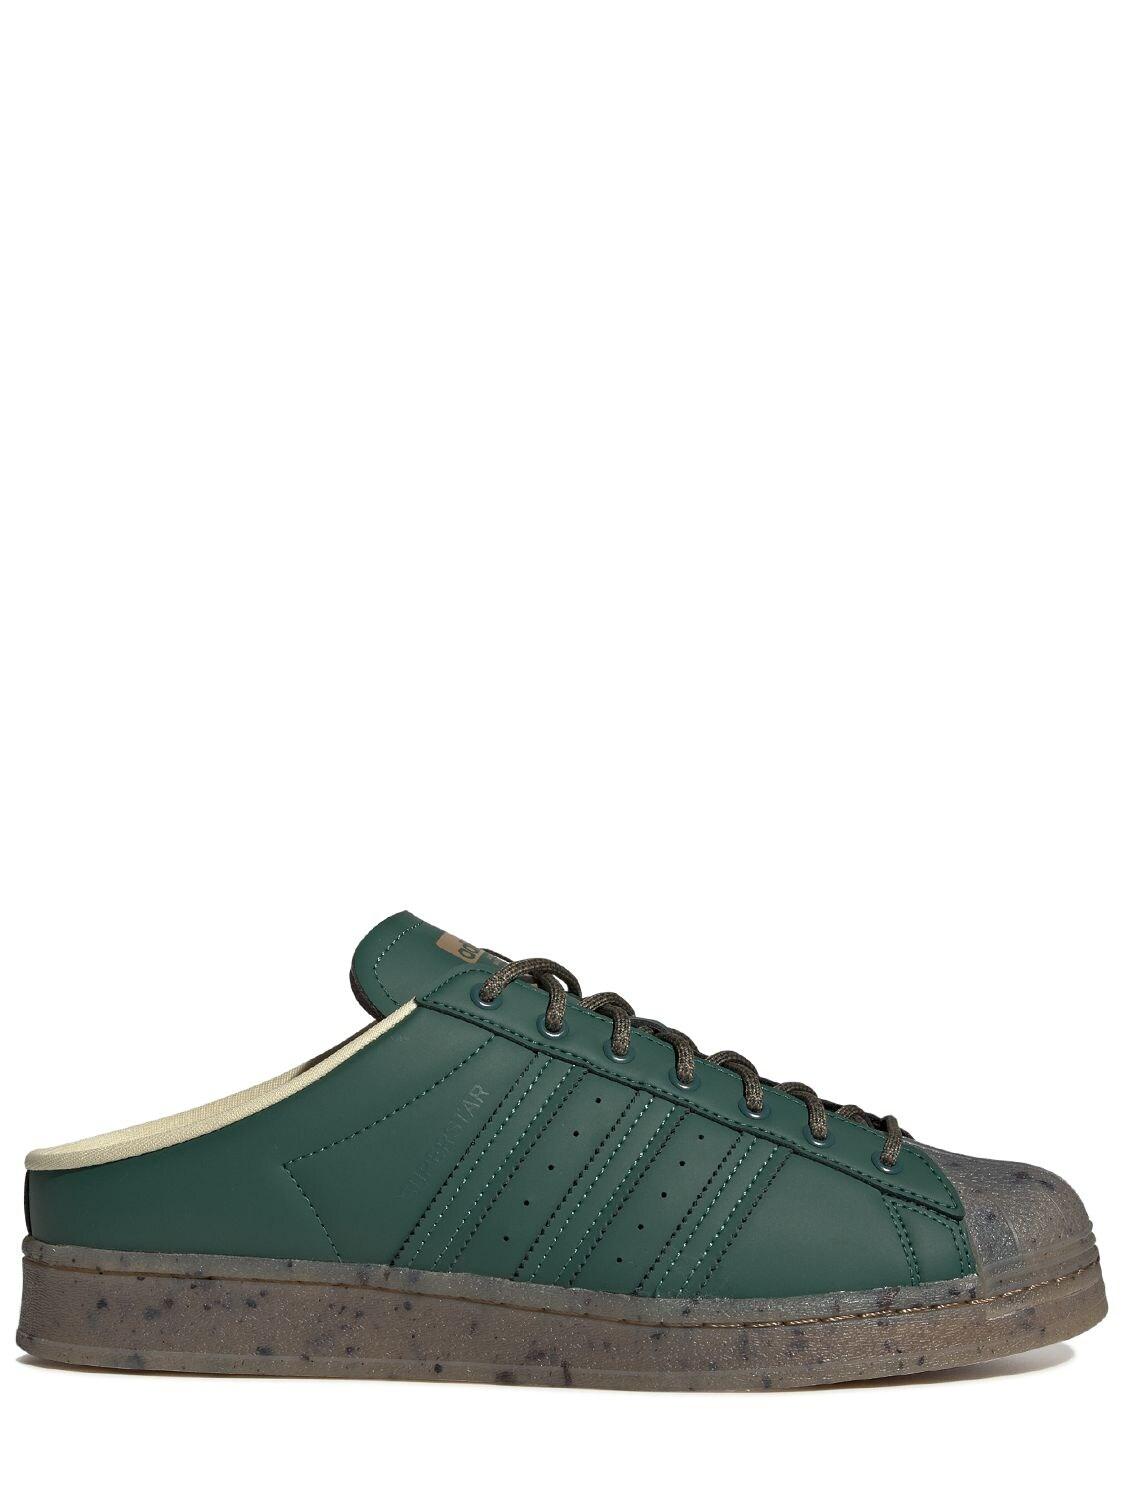 adidas Originals Superstar Mule Plant And Grow Sneakers in Green | Lyst